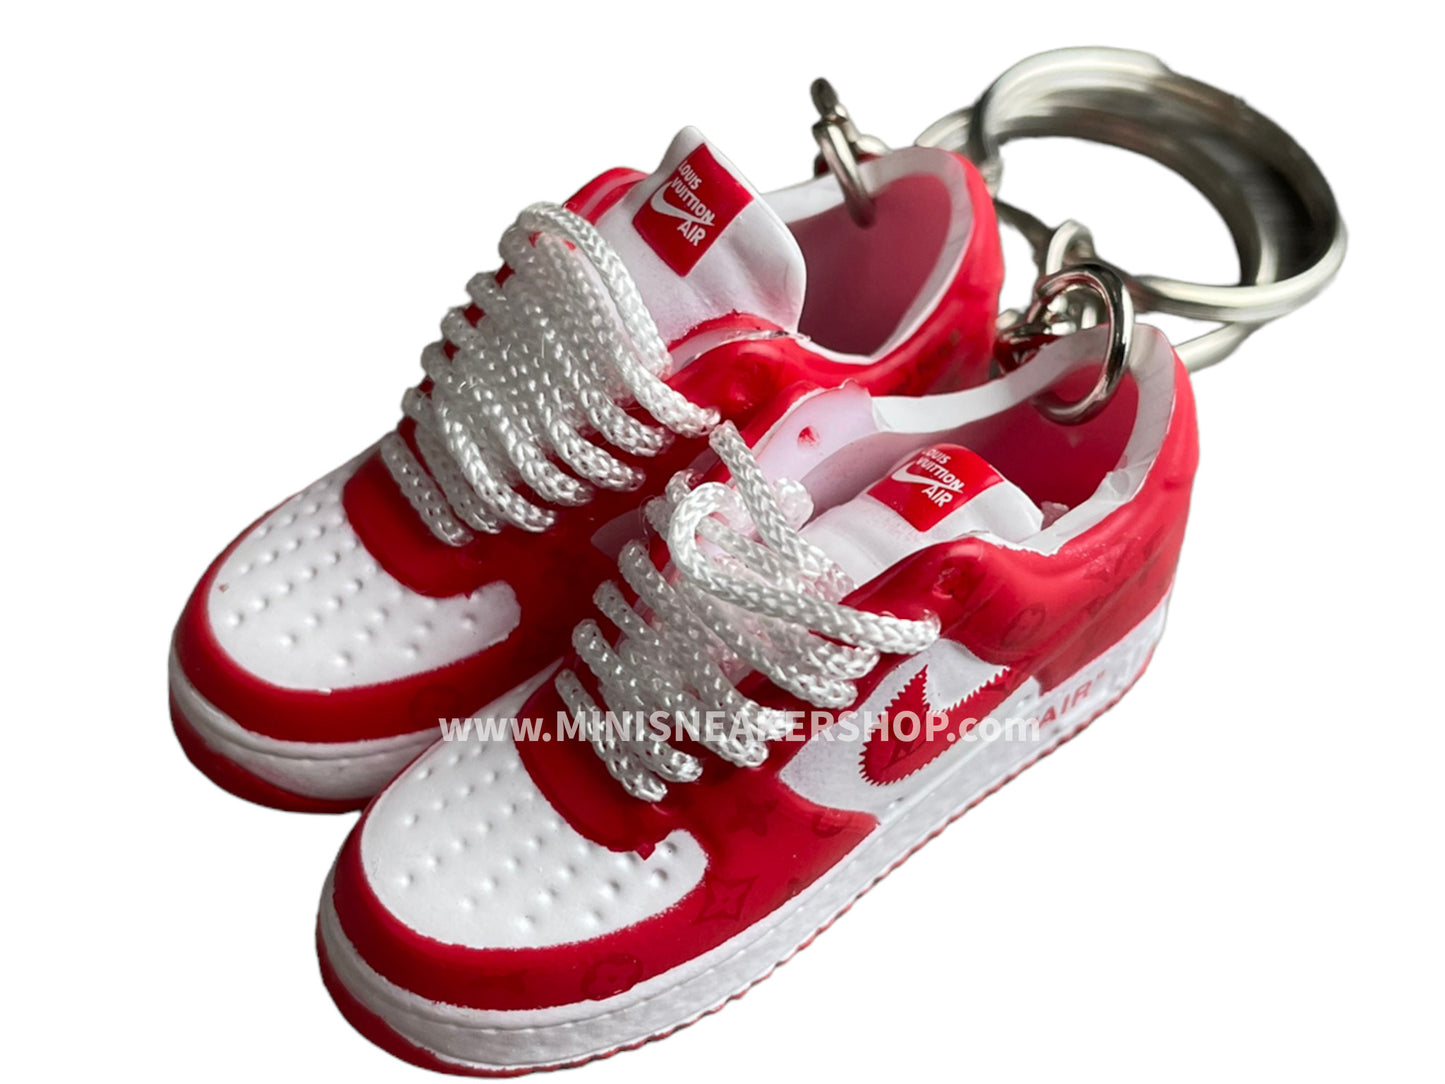 Mini 3D sneaker keychains Air Force 1 x LV - Red White